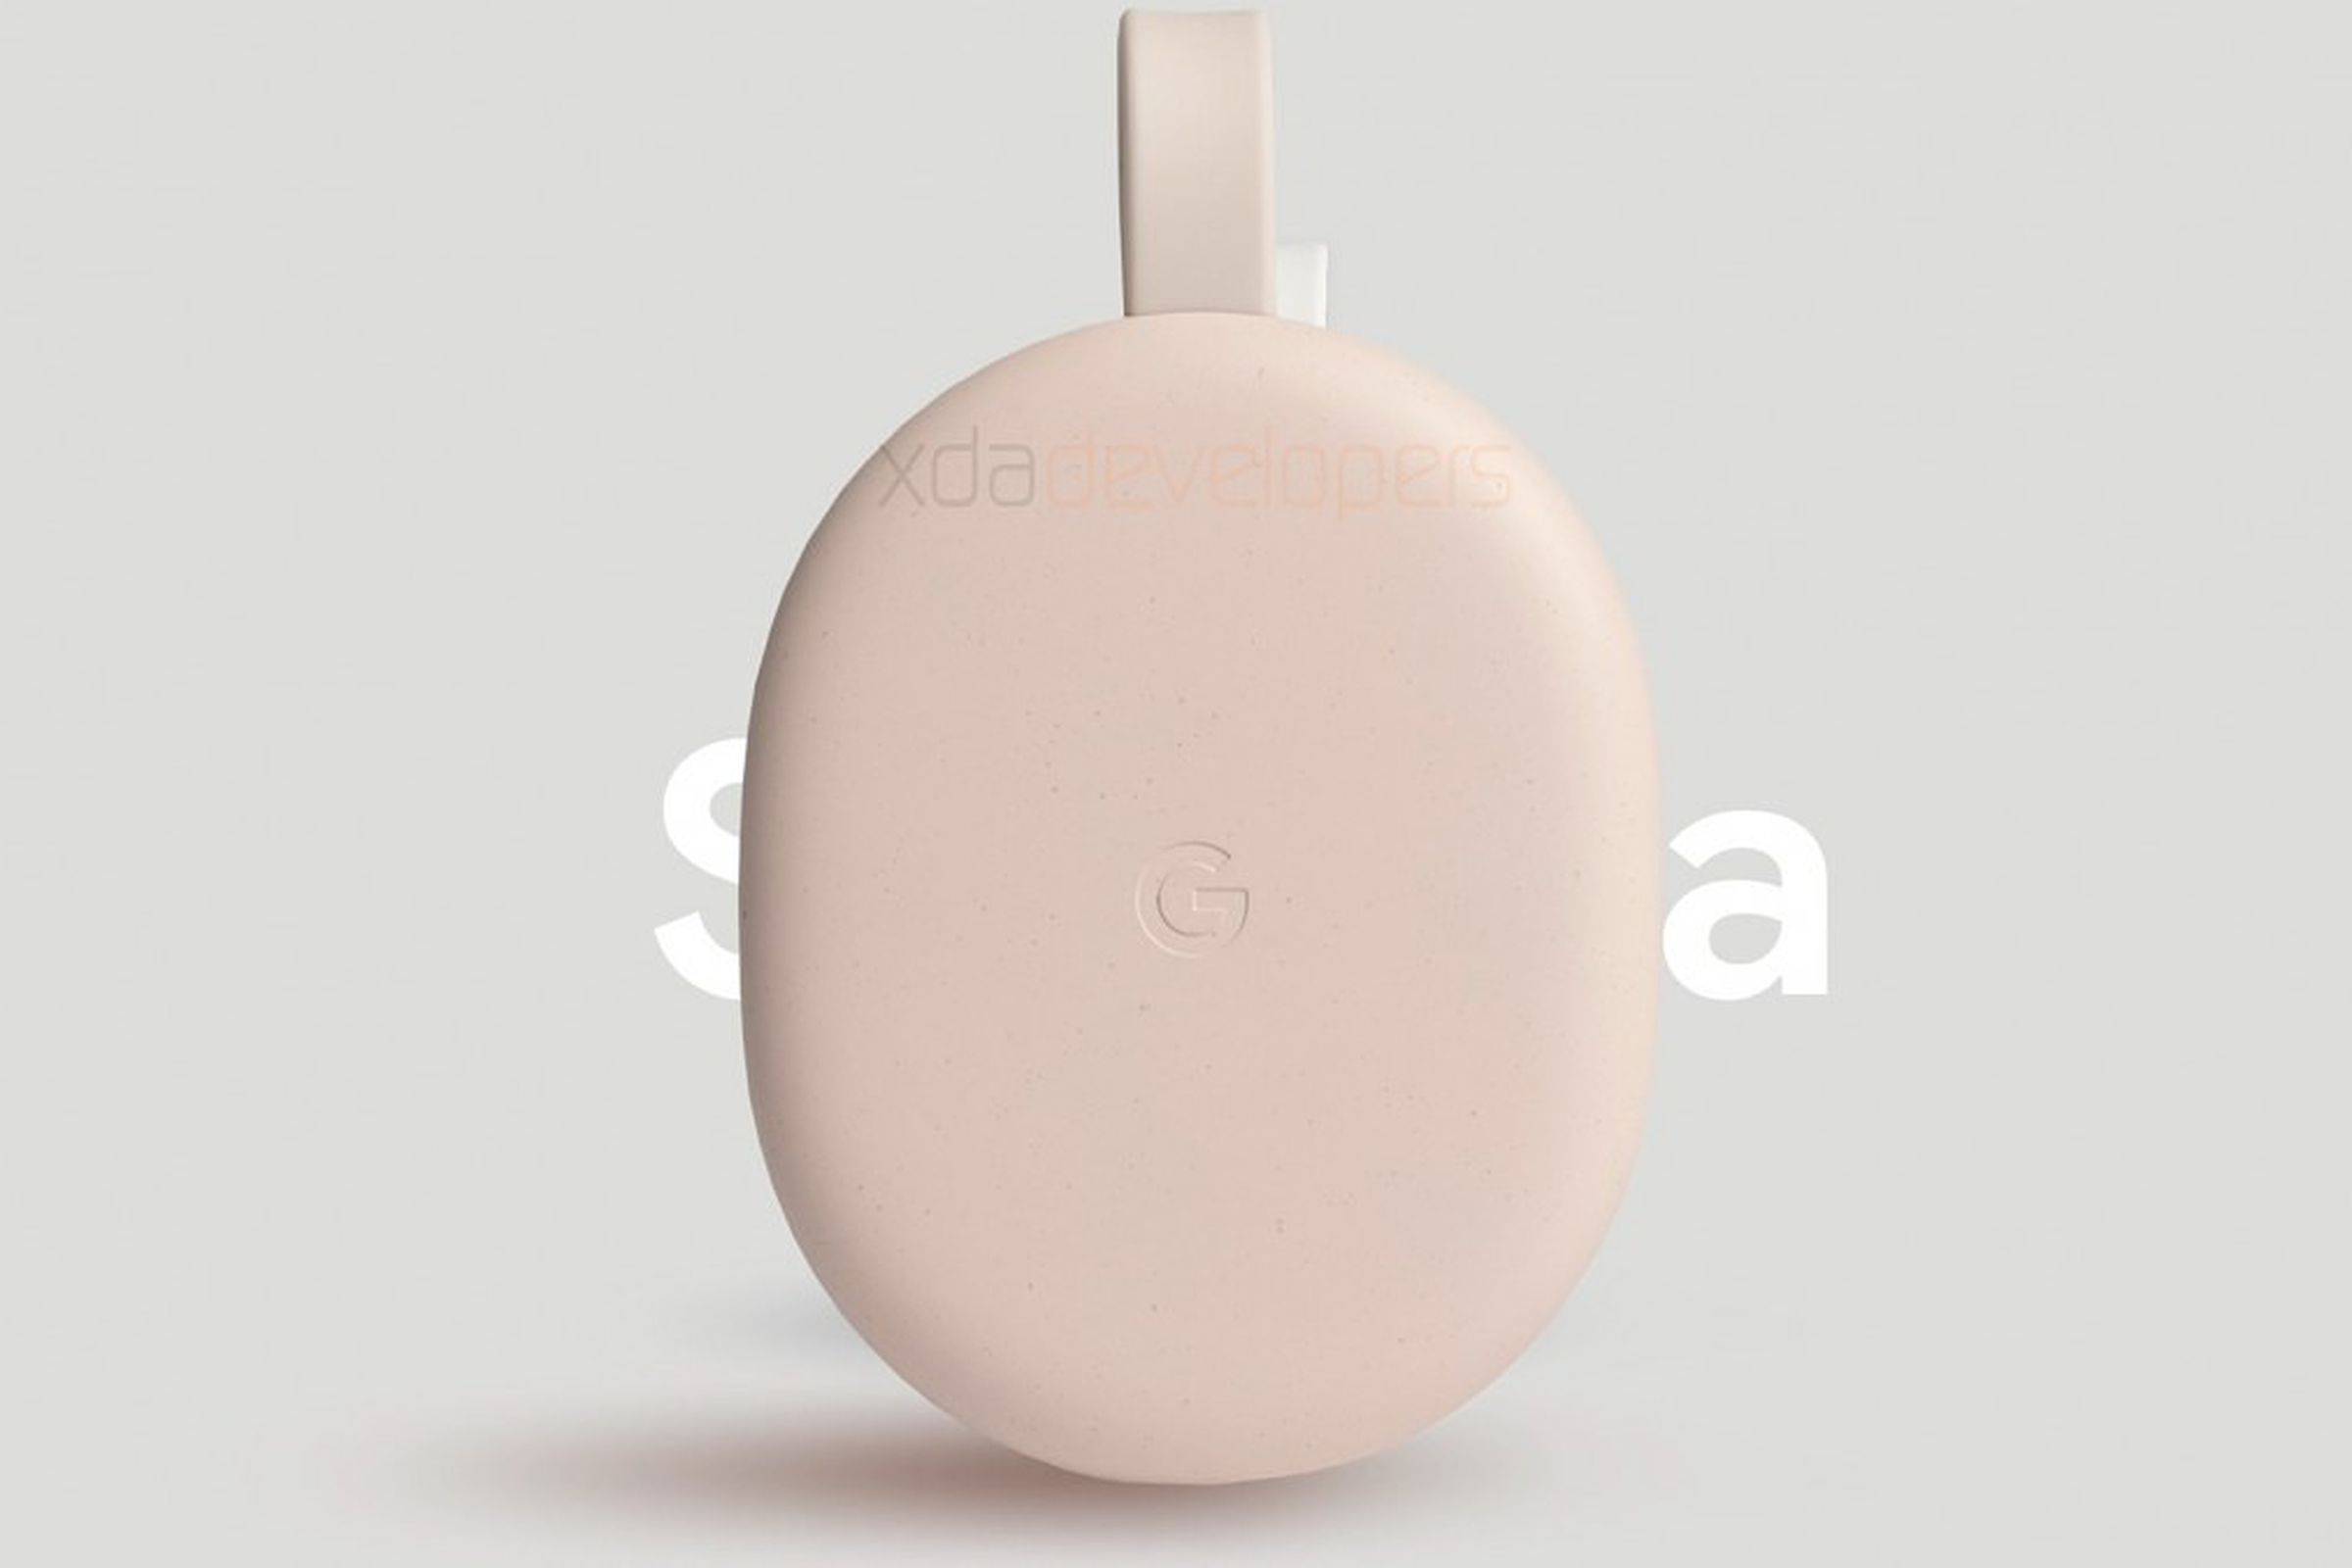 The rumored next version of Google’s TV dongle